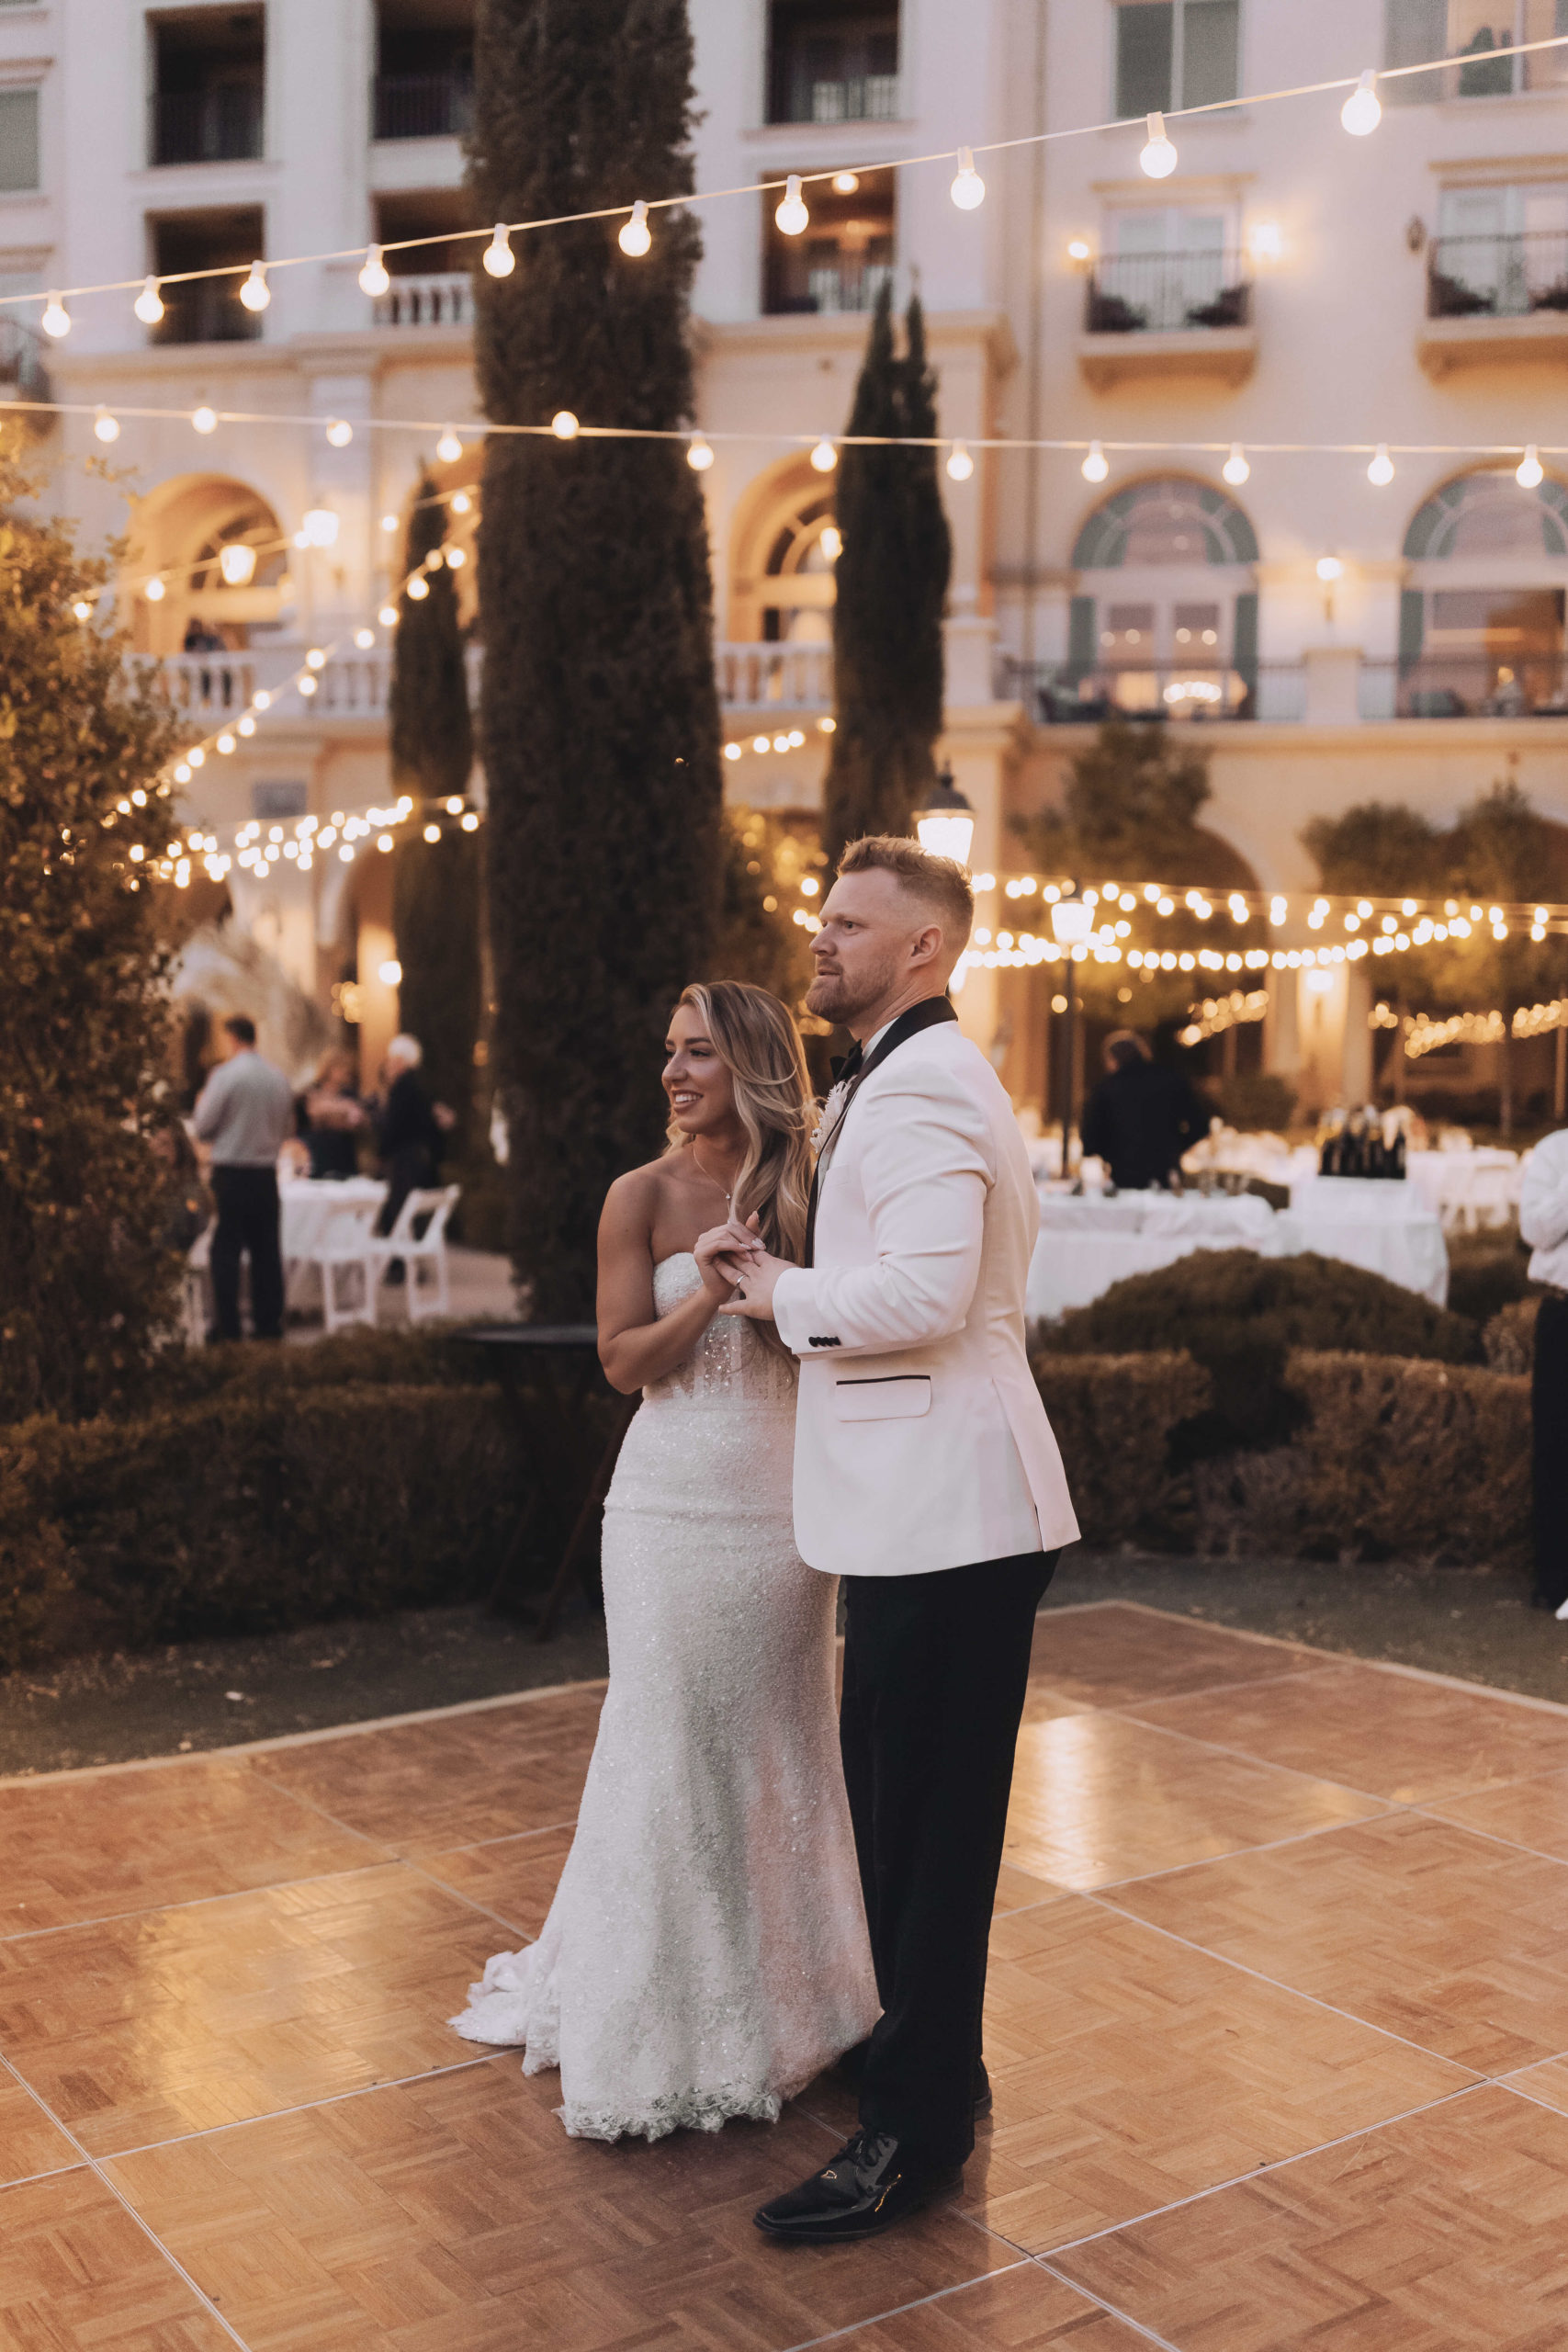 Lake Las Vegas Meets Modern Boho Bride. First dance as Mr. and Mrs. to Livin on love that was sung by one of the groomsmen.